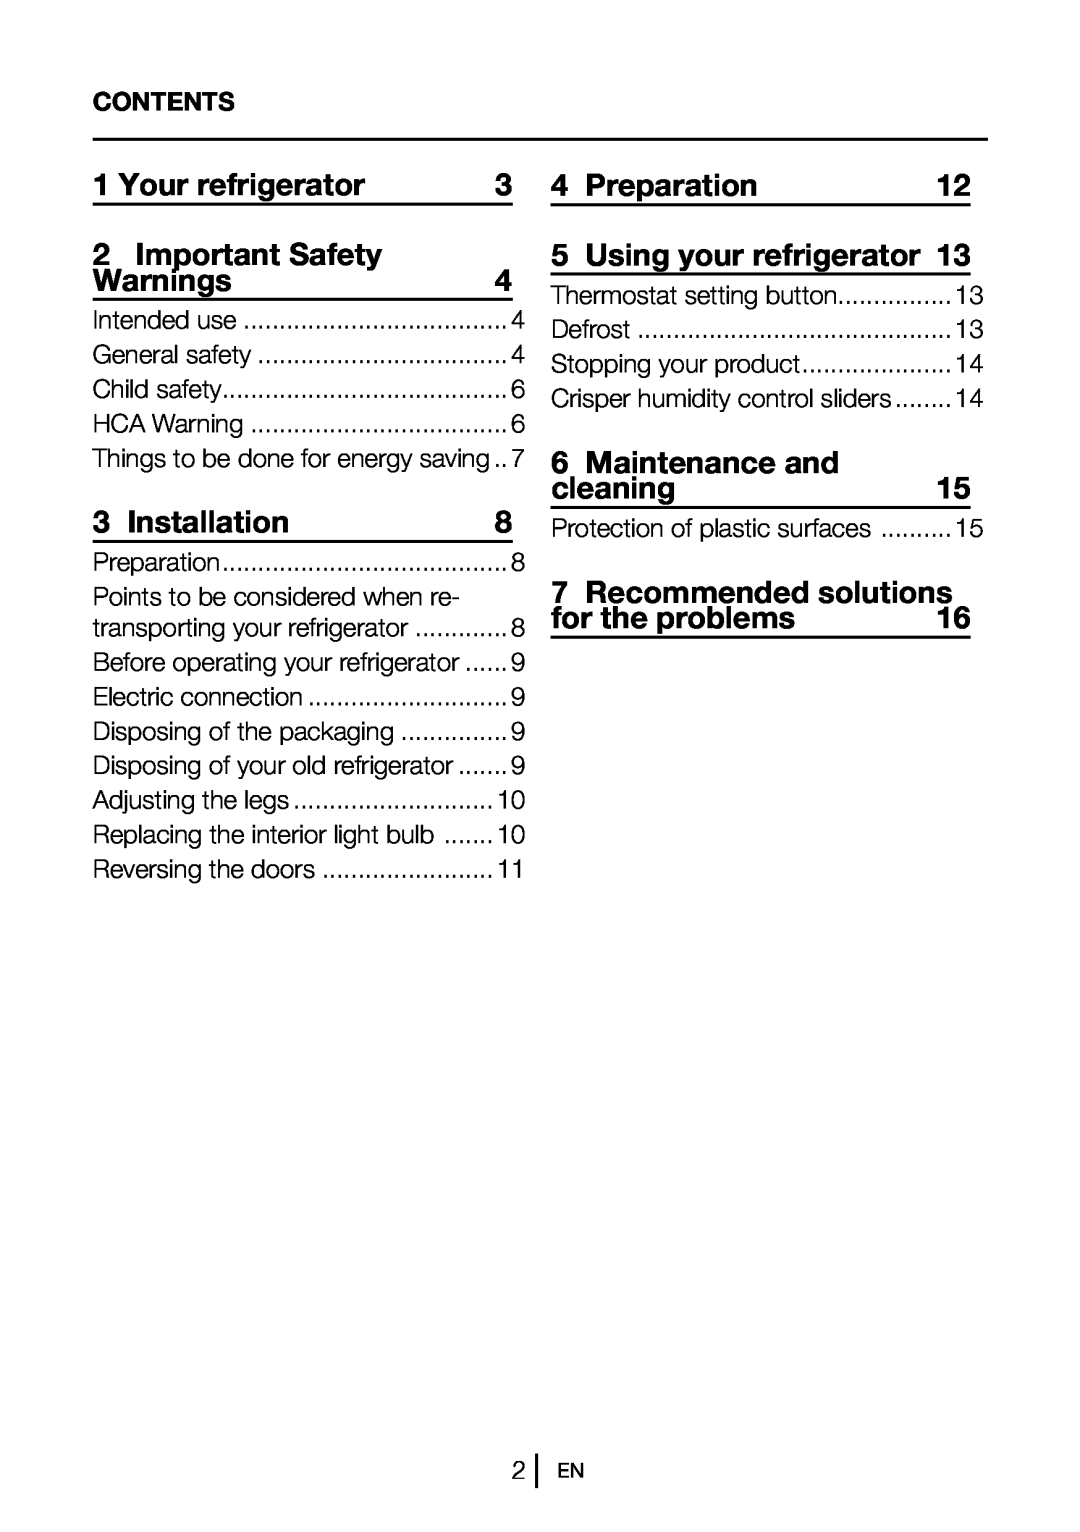 Blomberg DSM 9651 A+ Your refrigerator, Important Safety, Warnings, Installation, Preparation, Using your refrigerator 